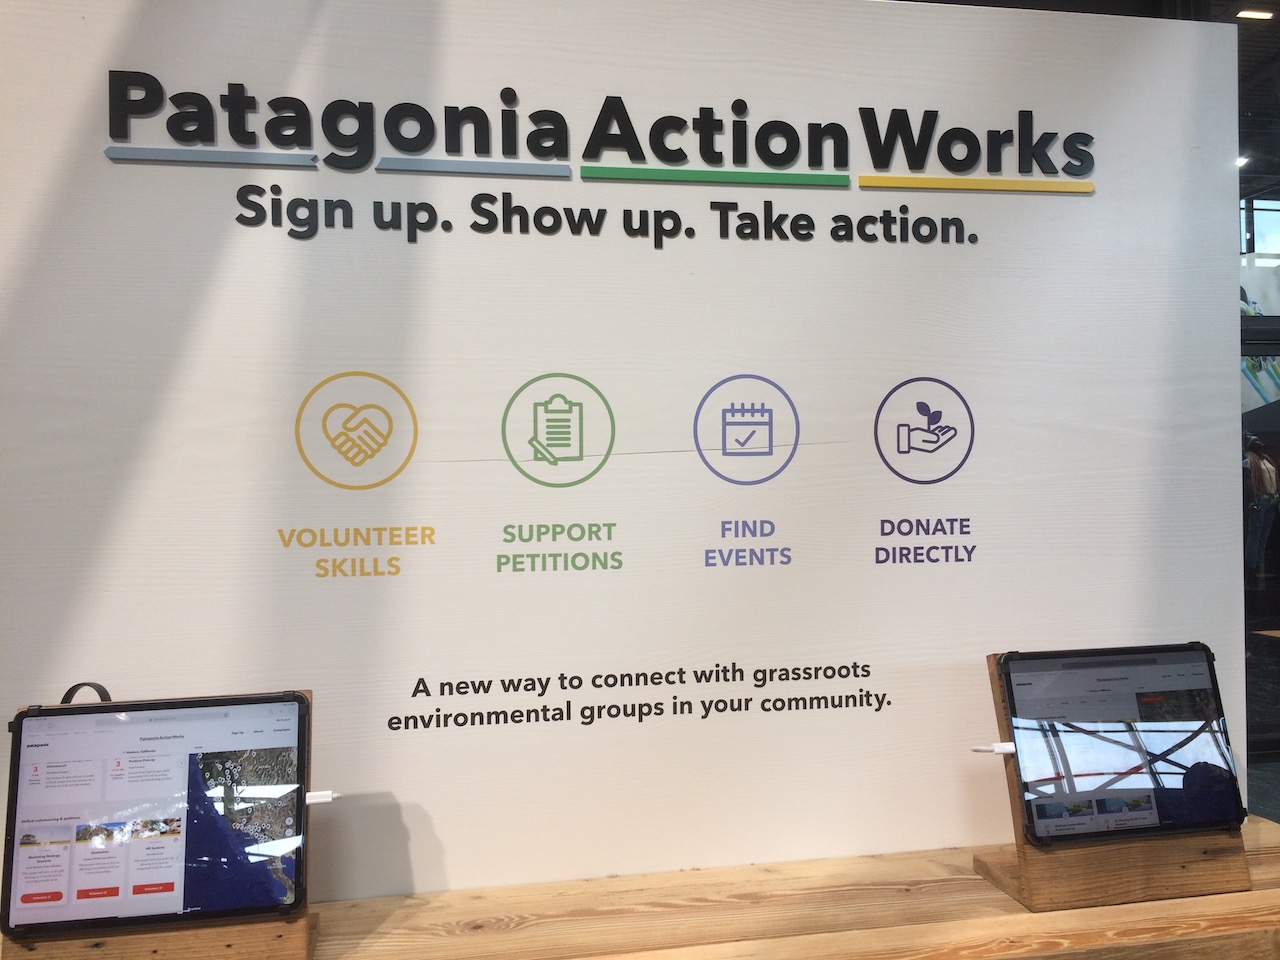 Patagonia Action Works launches in Europe 24th Sept to connect environmental groups to the community - Boardsport SOURCE